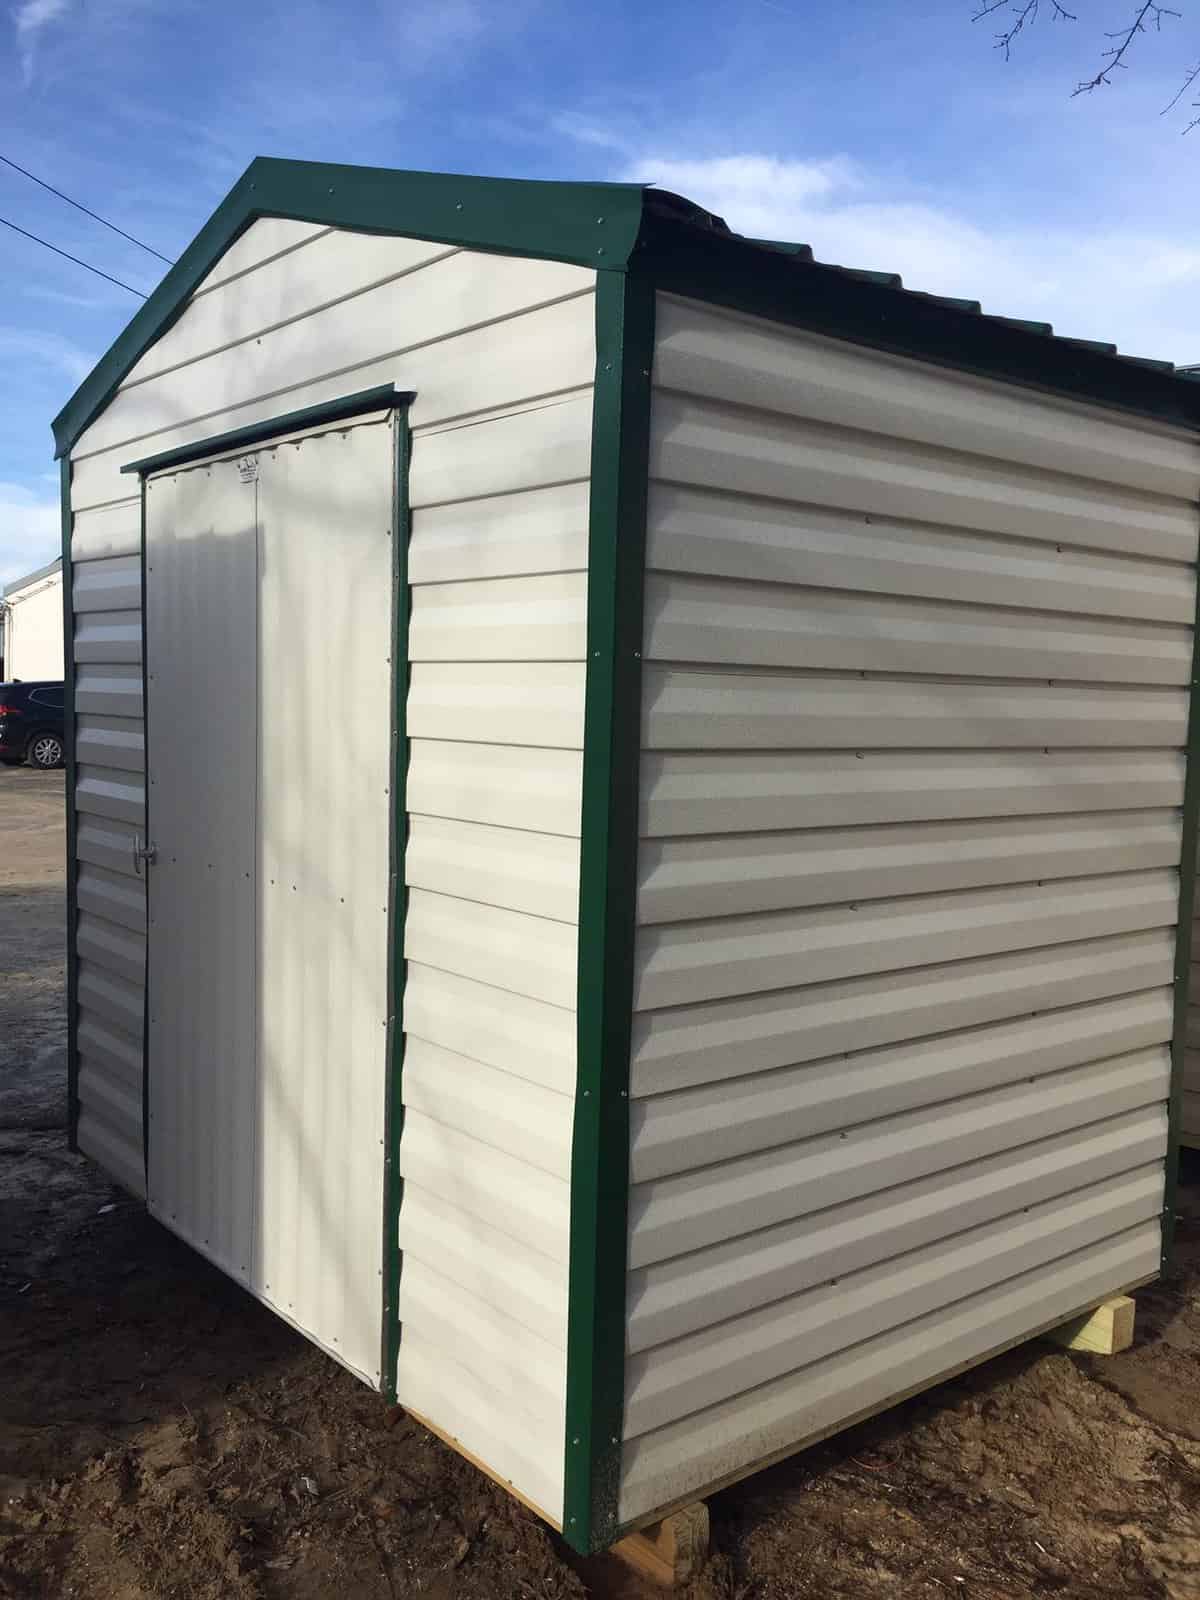 10x8 shed for sale Robin sheds Probuilt Structures Sheds For Sale In Central Florida Shed in citrus county and sheds in marion county metal siding shed with foor window shed